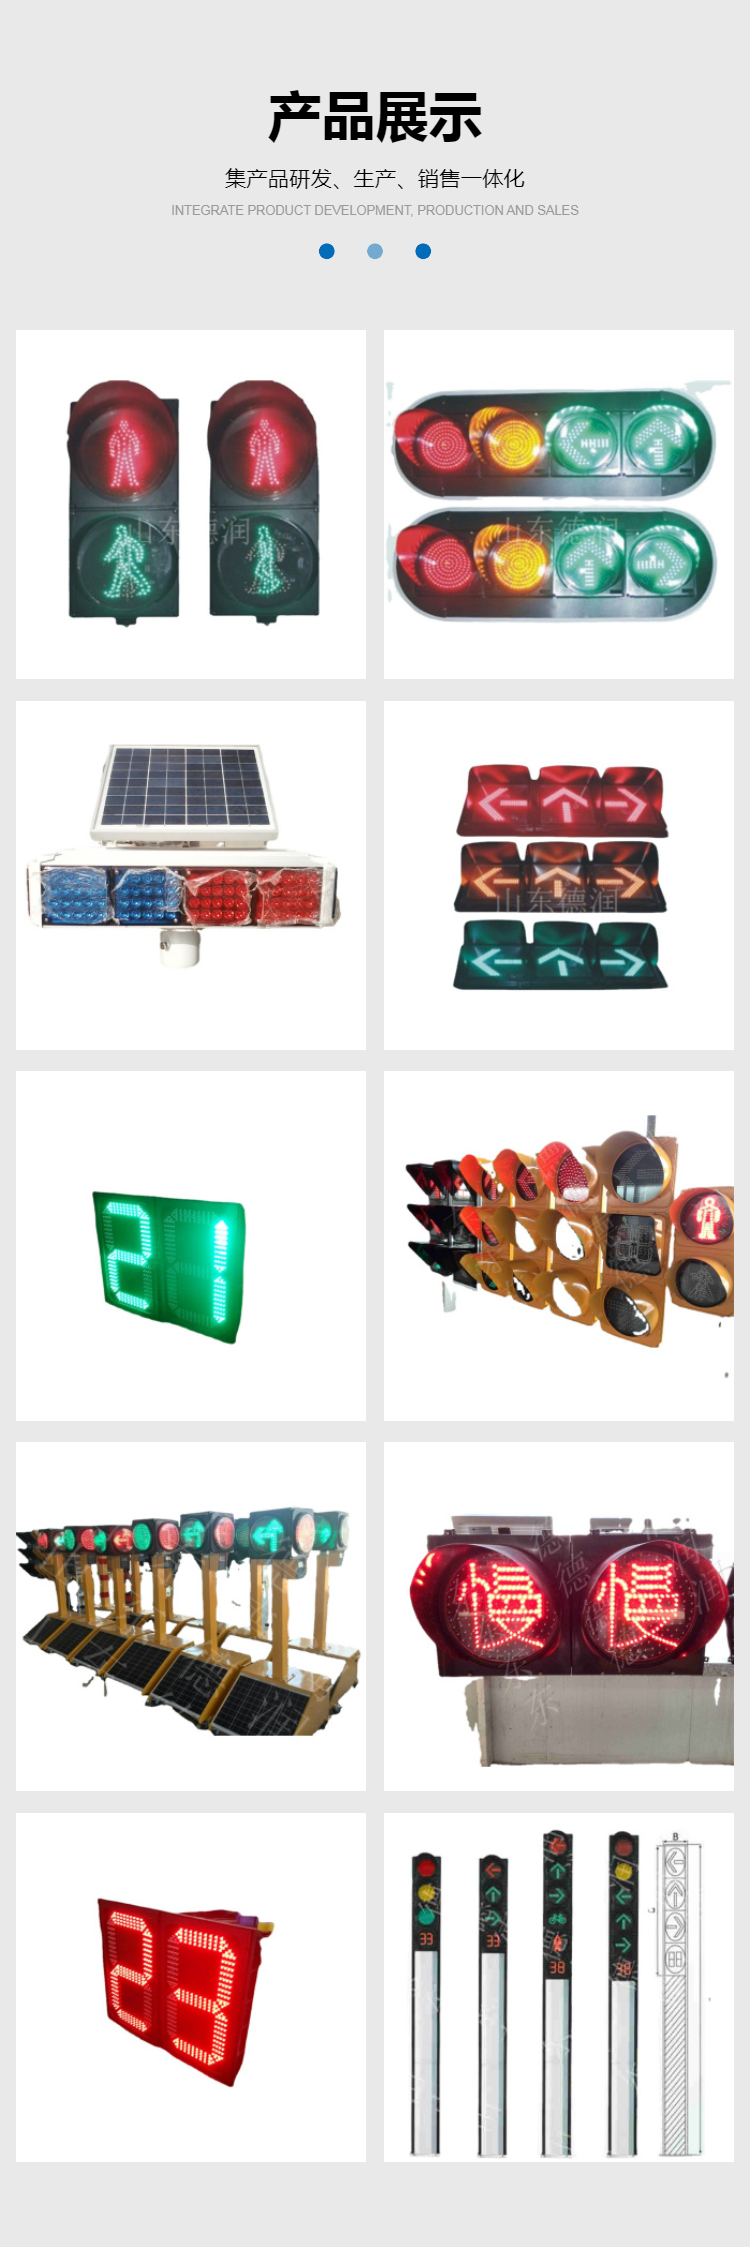 Boen provides solar signal lights with cast aluminum casing, traffic lights with LED traffic lights that support customized specifications